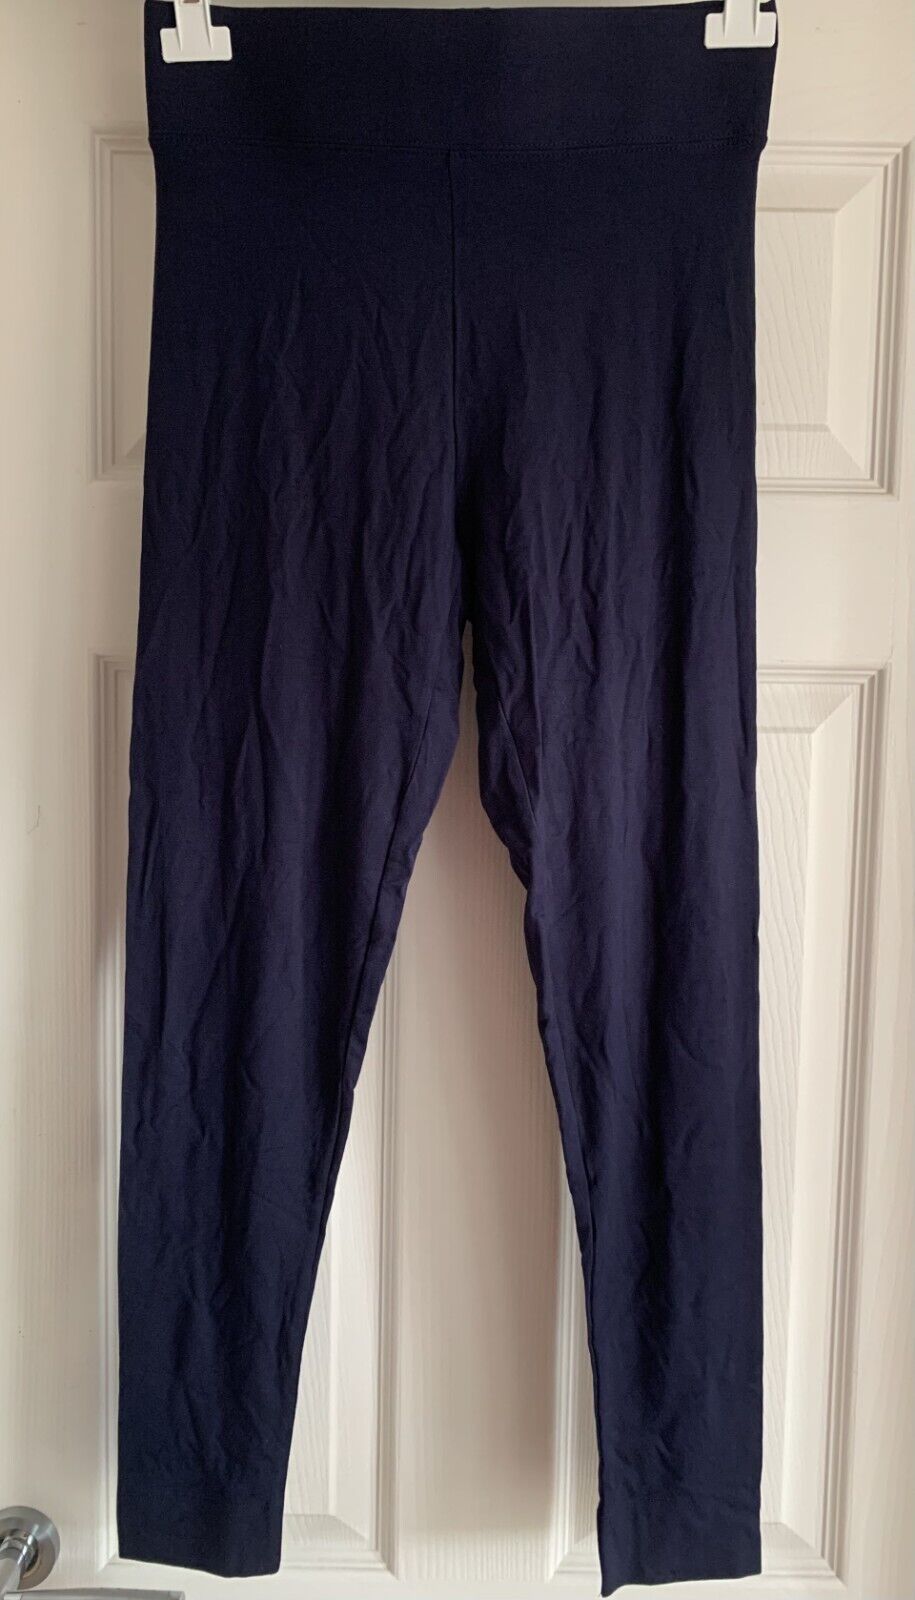 EX M*S Navy High Waisted Stretchy Leggings in Sizes 10R, 18R, 8L, 10L